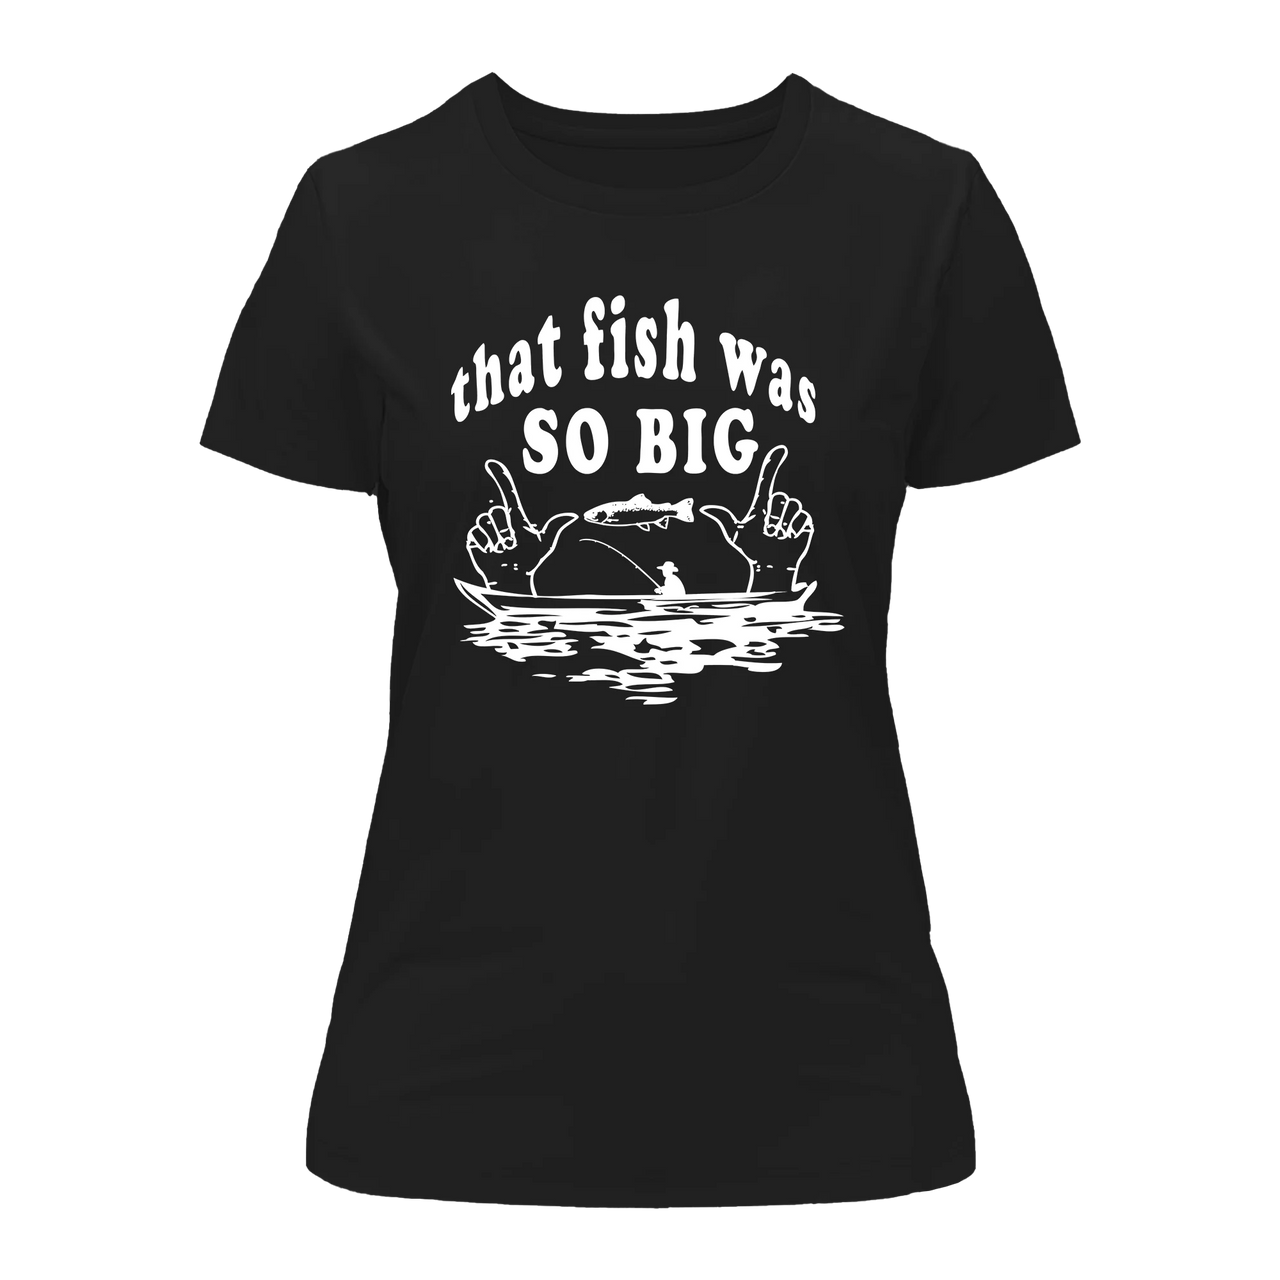 That Fish Was So Big T-Shirt for Women